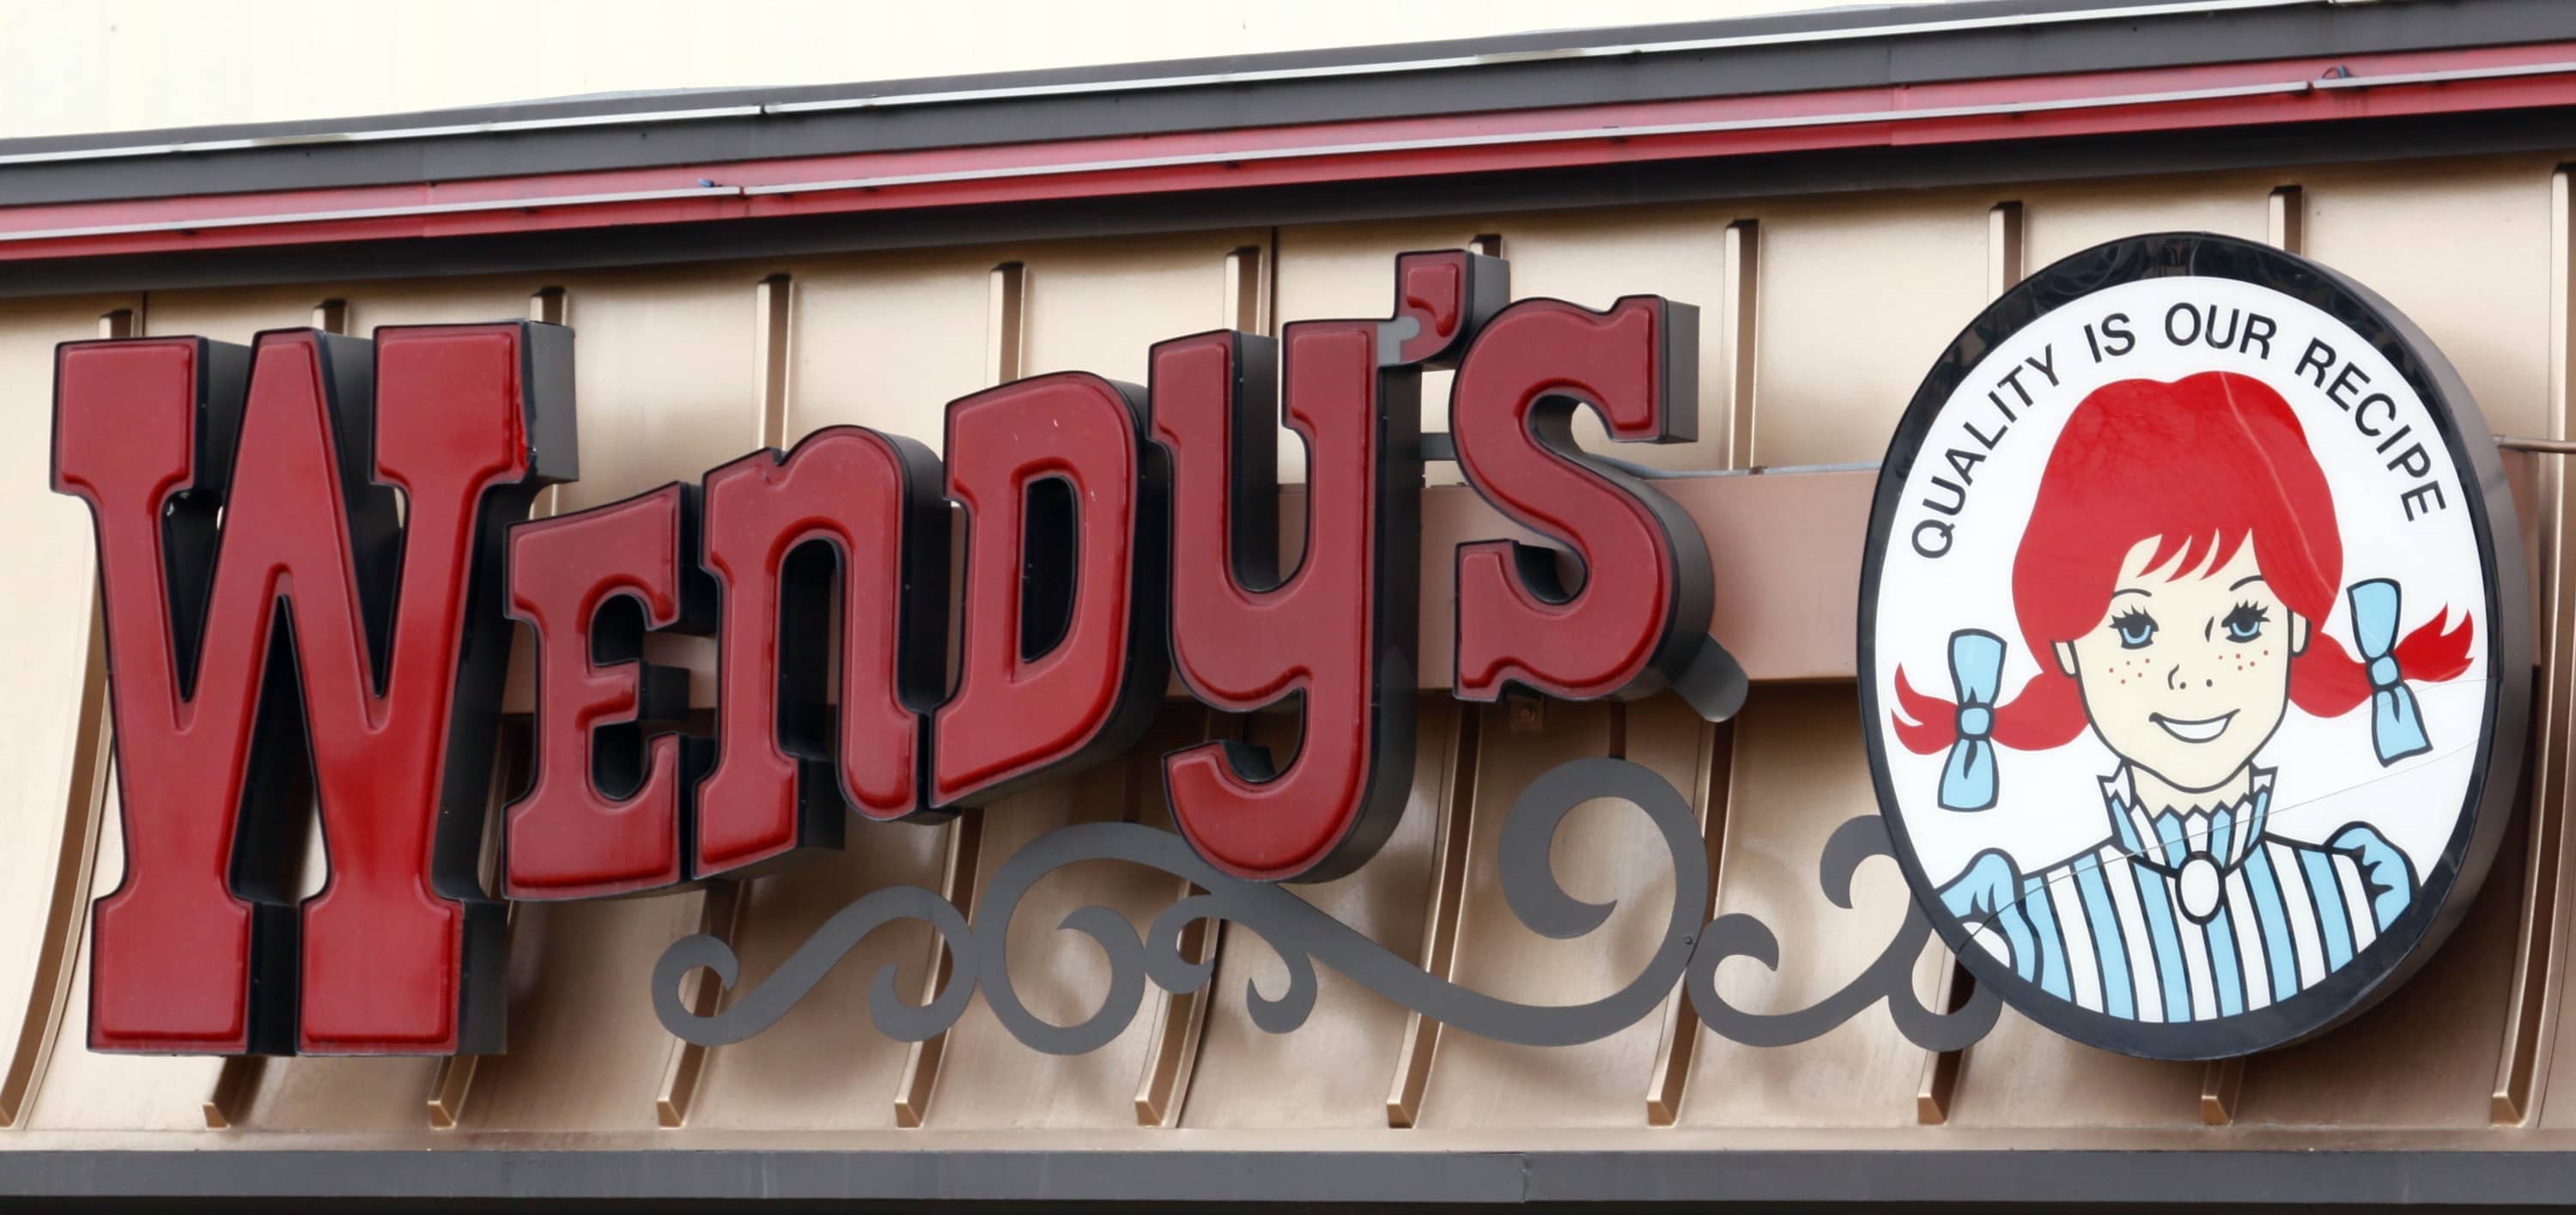 the-wendys-signage-is-pictured-at-a-wendys-restaurant-in-westminster